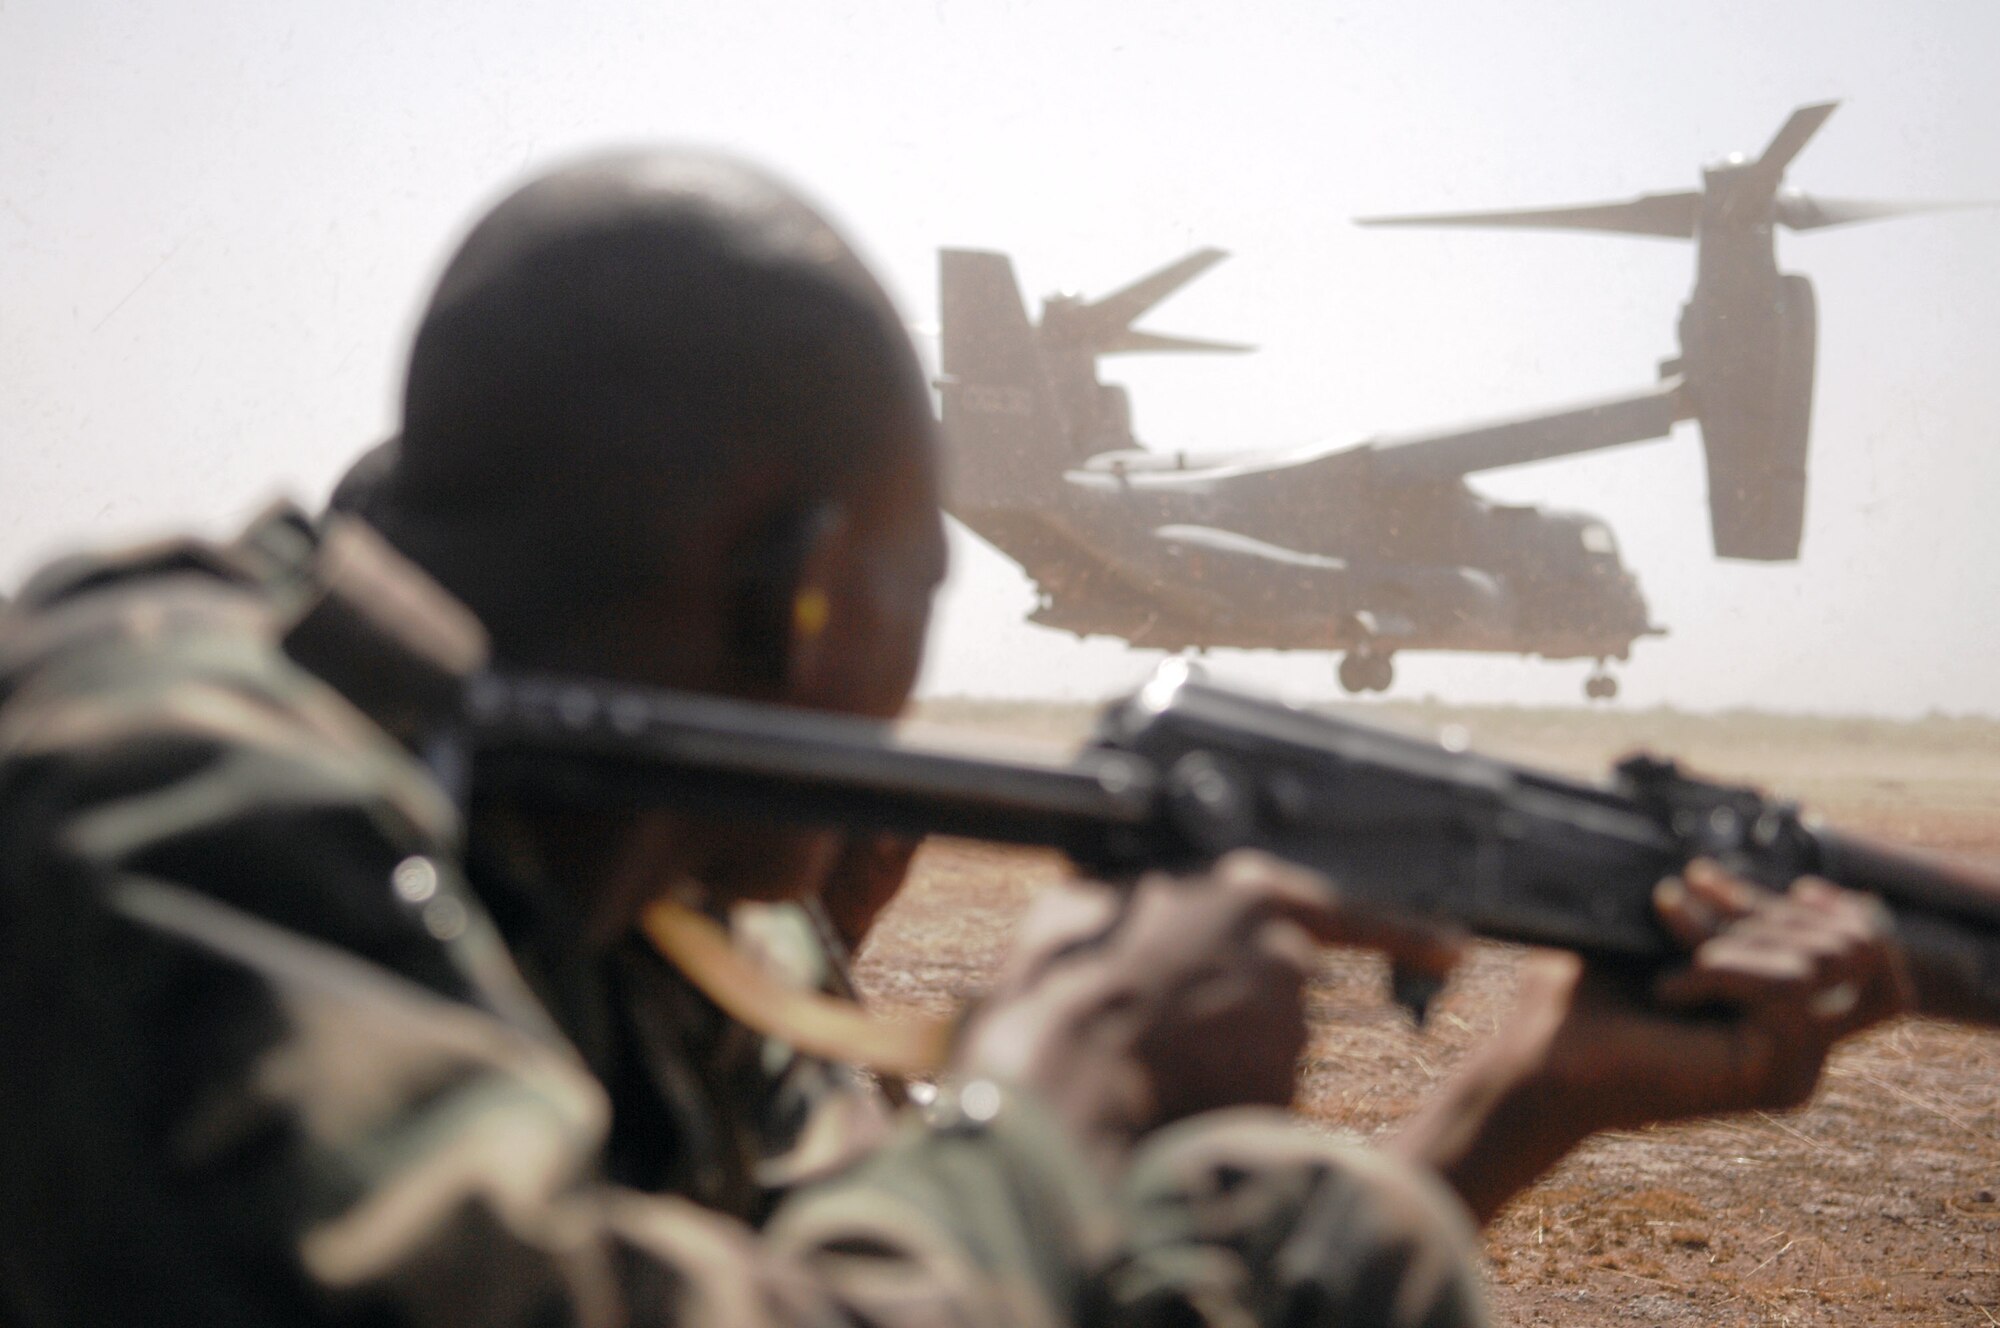 A Malian soldier takes a defensive position while an Air Force Special Operations Command CV-22 Osprey departs a landing zone as part of a drill for Exercise Flintlock in Bamako, Mali. (U.S. Air Force photo) 
